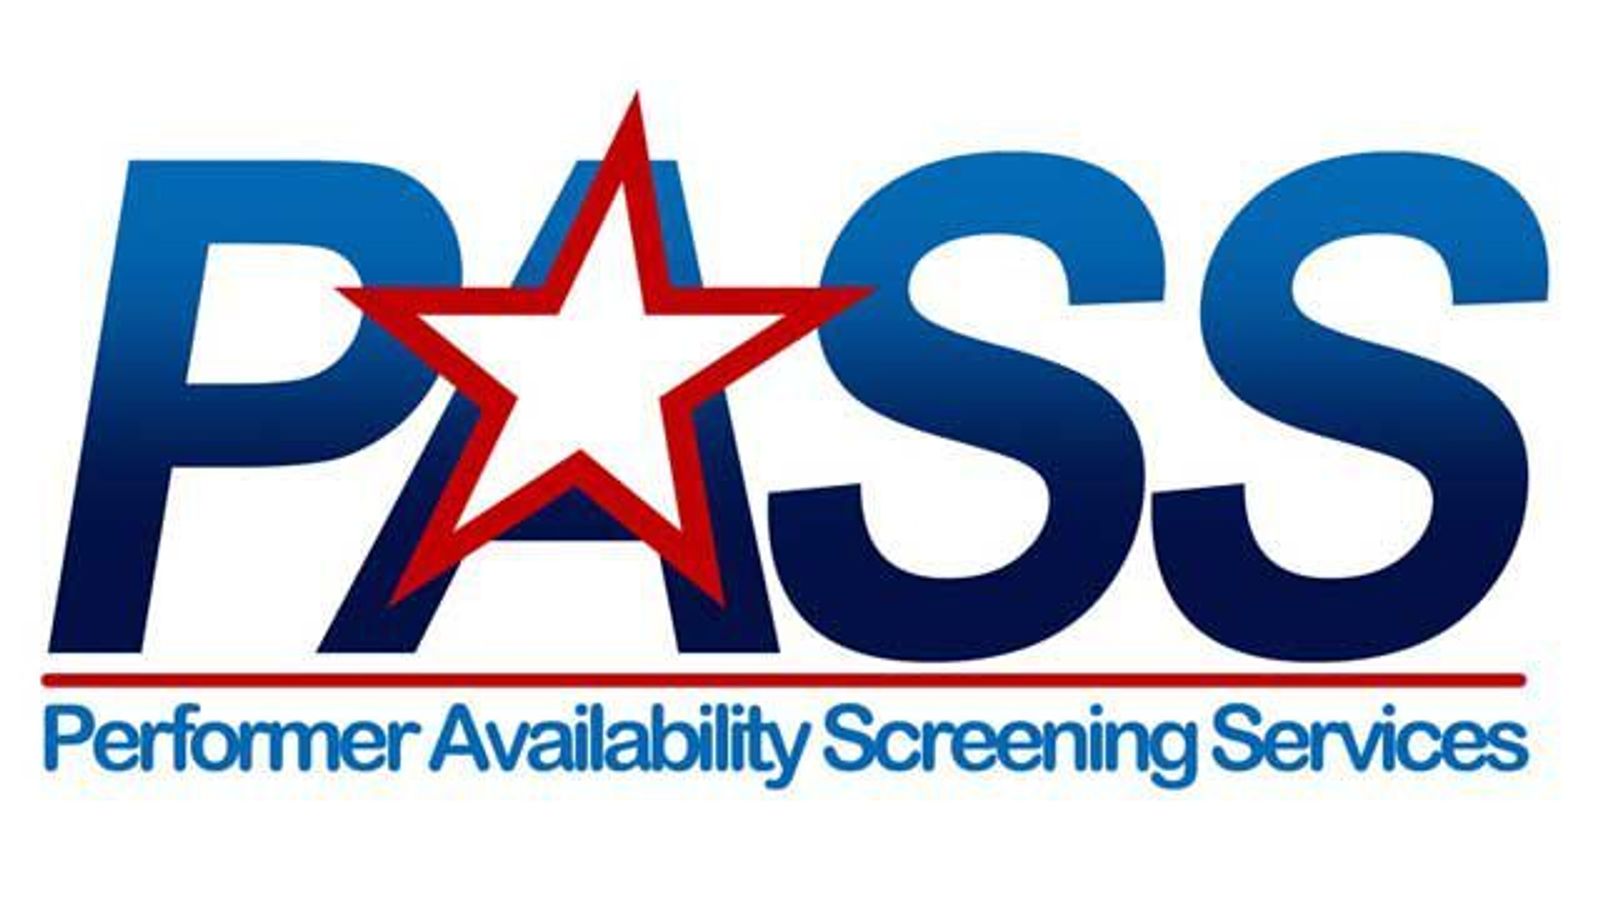 FSC Announces Free Screening at CET August 3-5